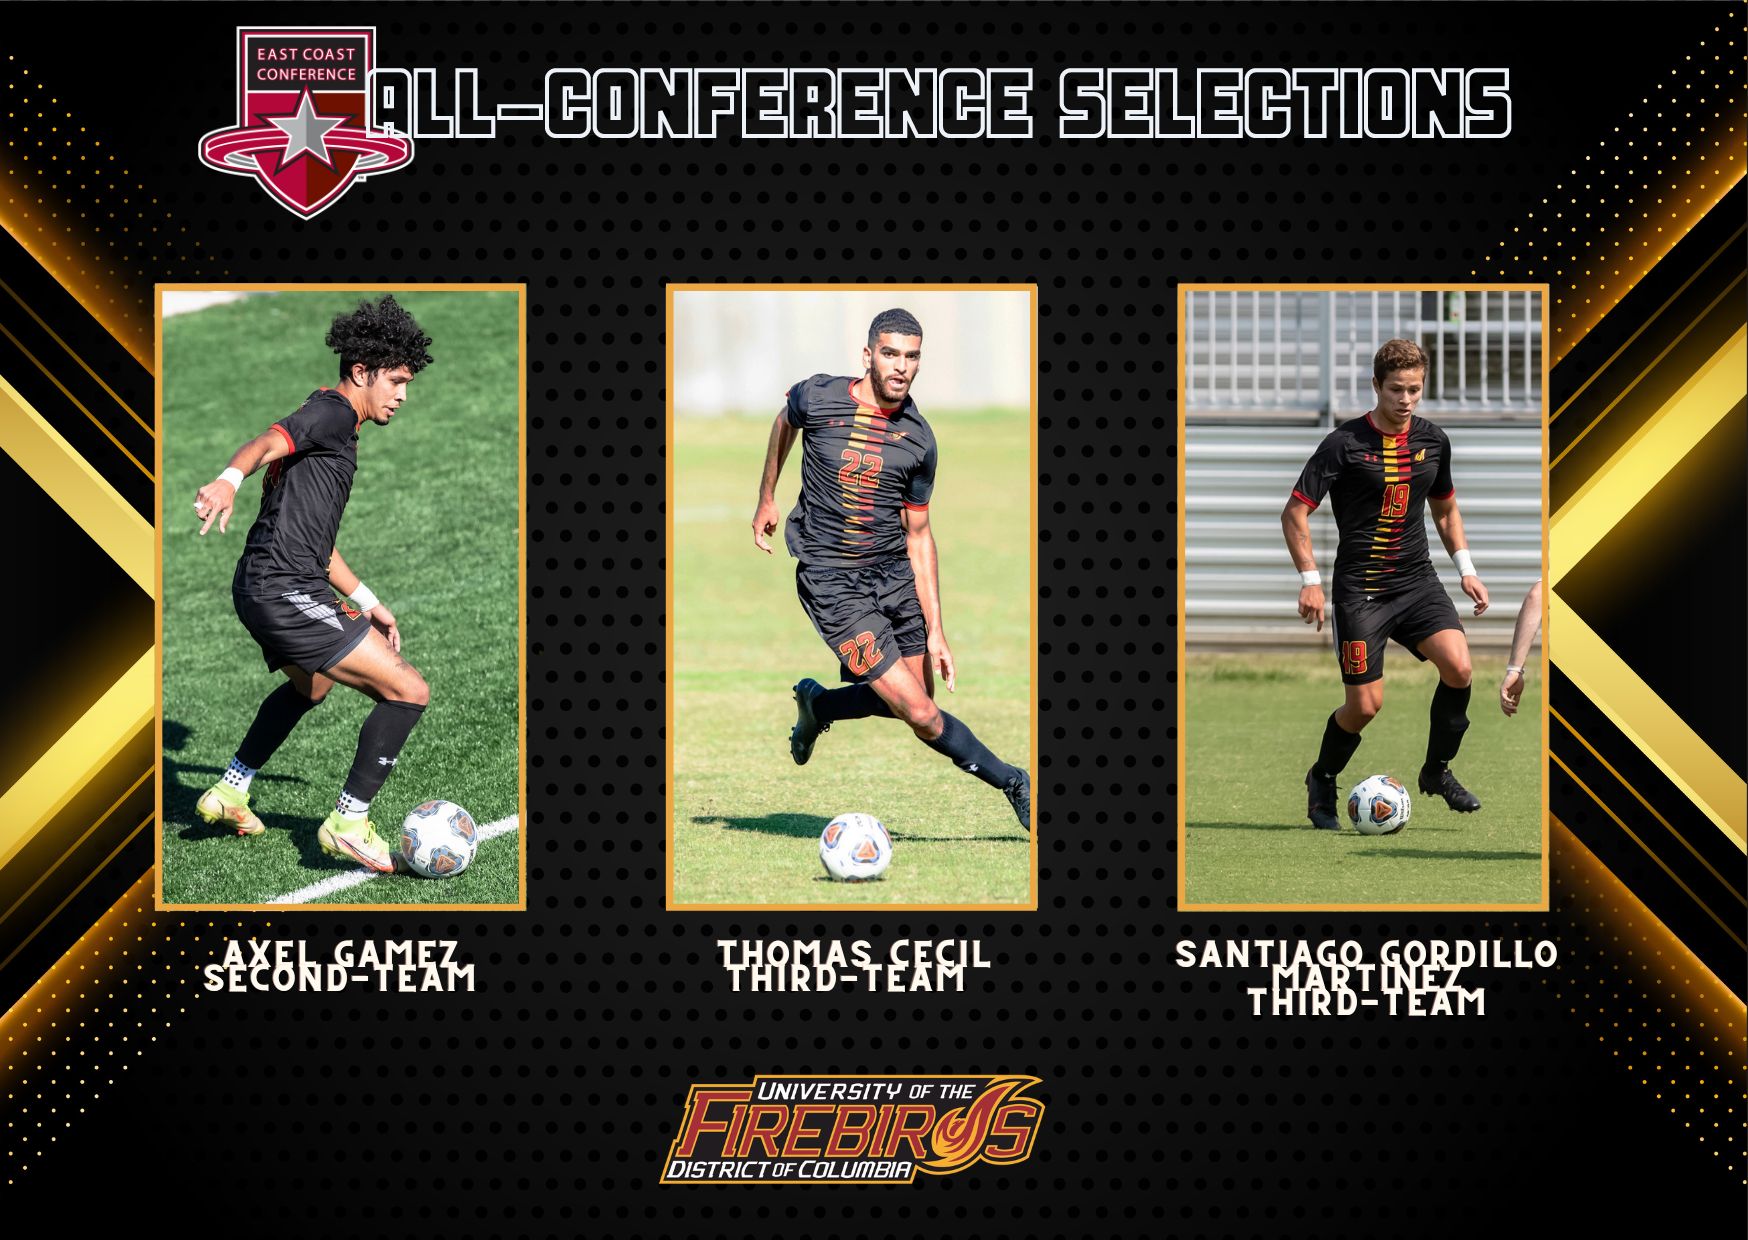 Gamez, Cecil and Martinez Earn All-Conference Post Season Honors